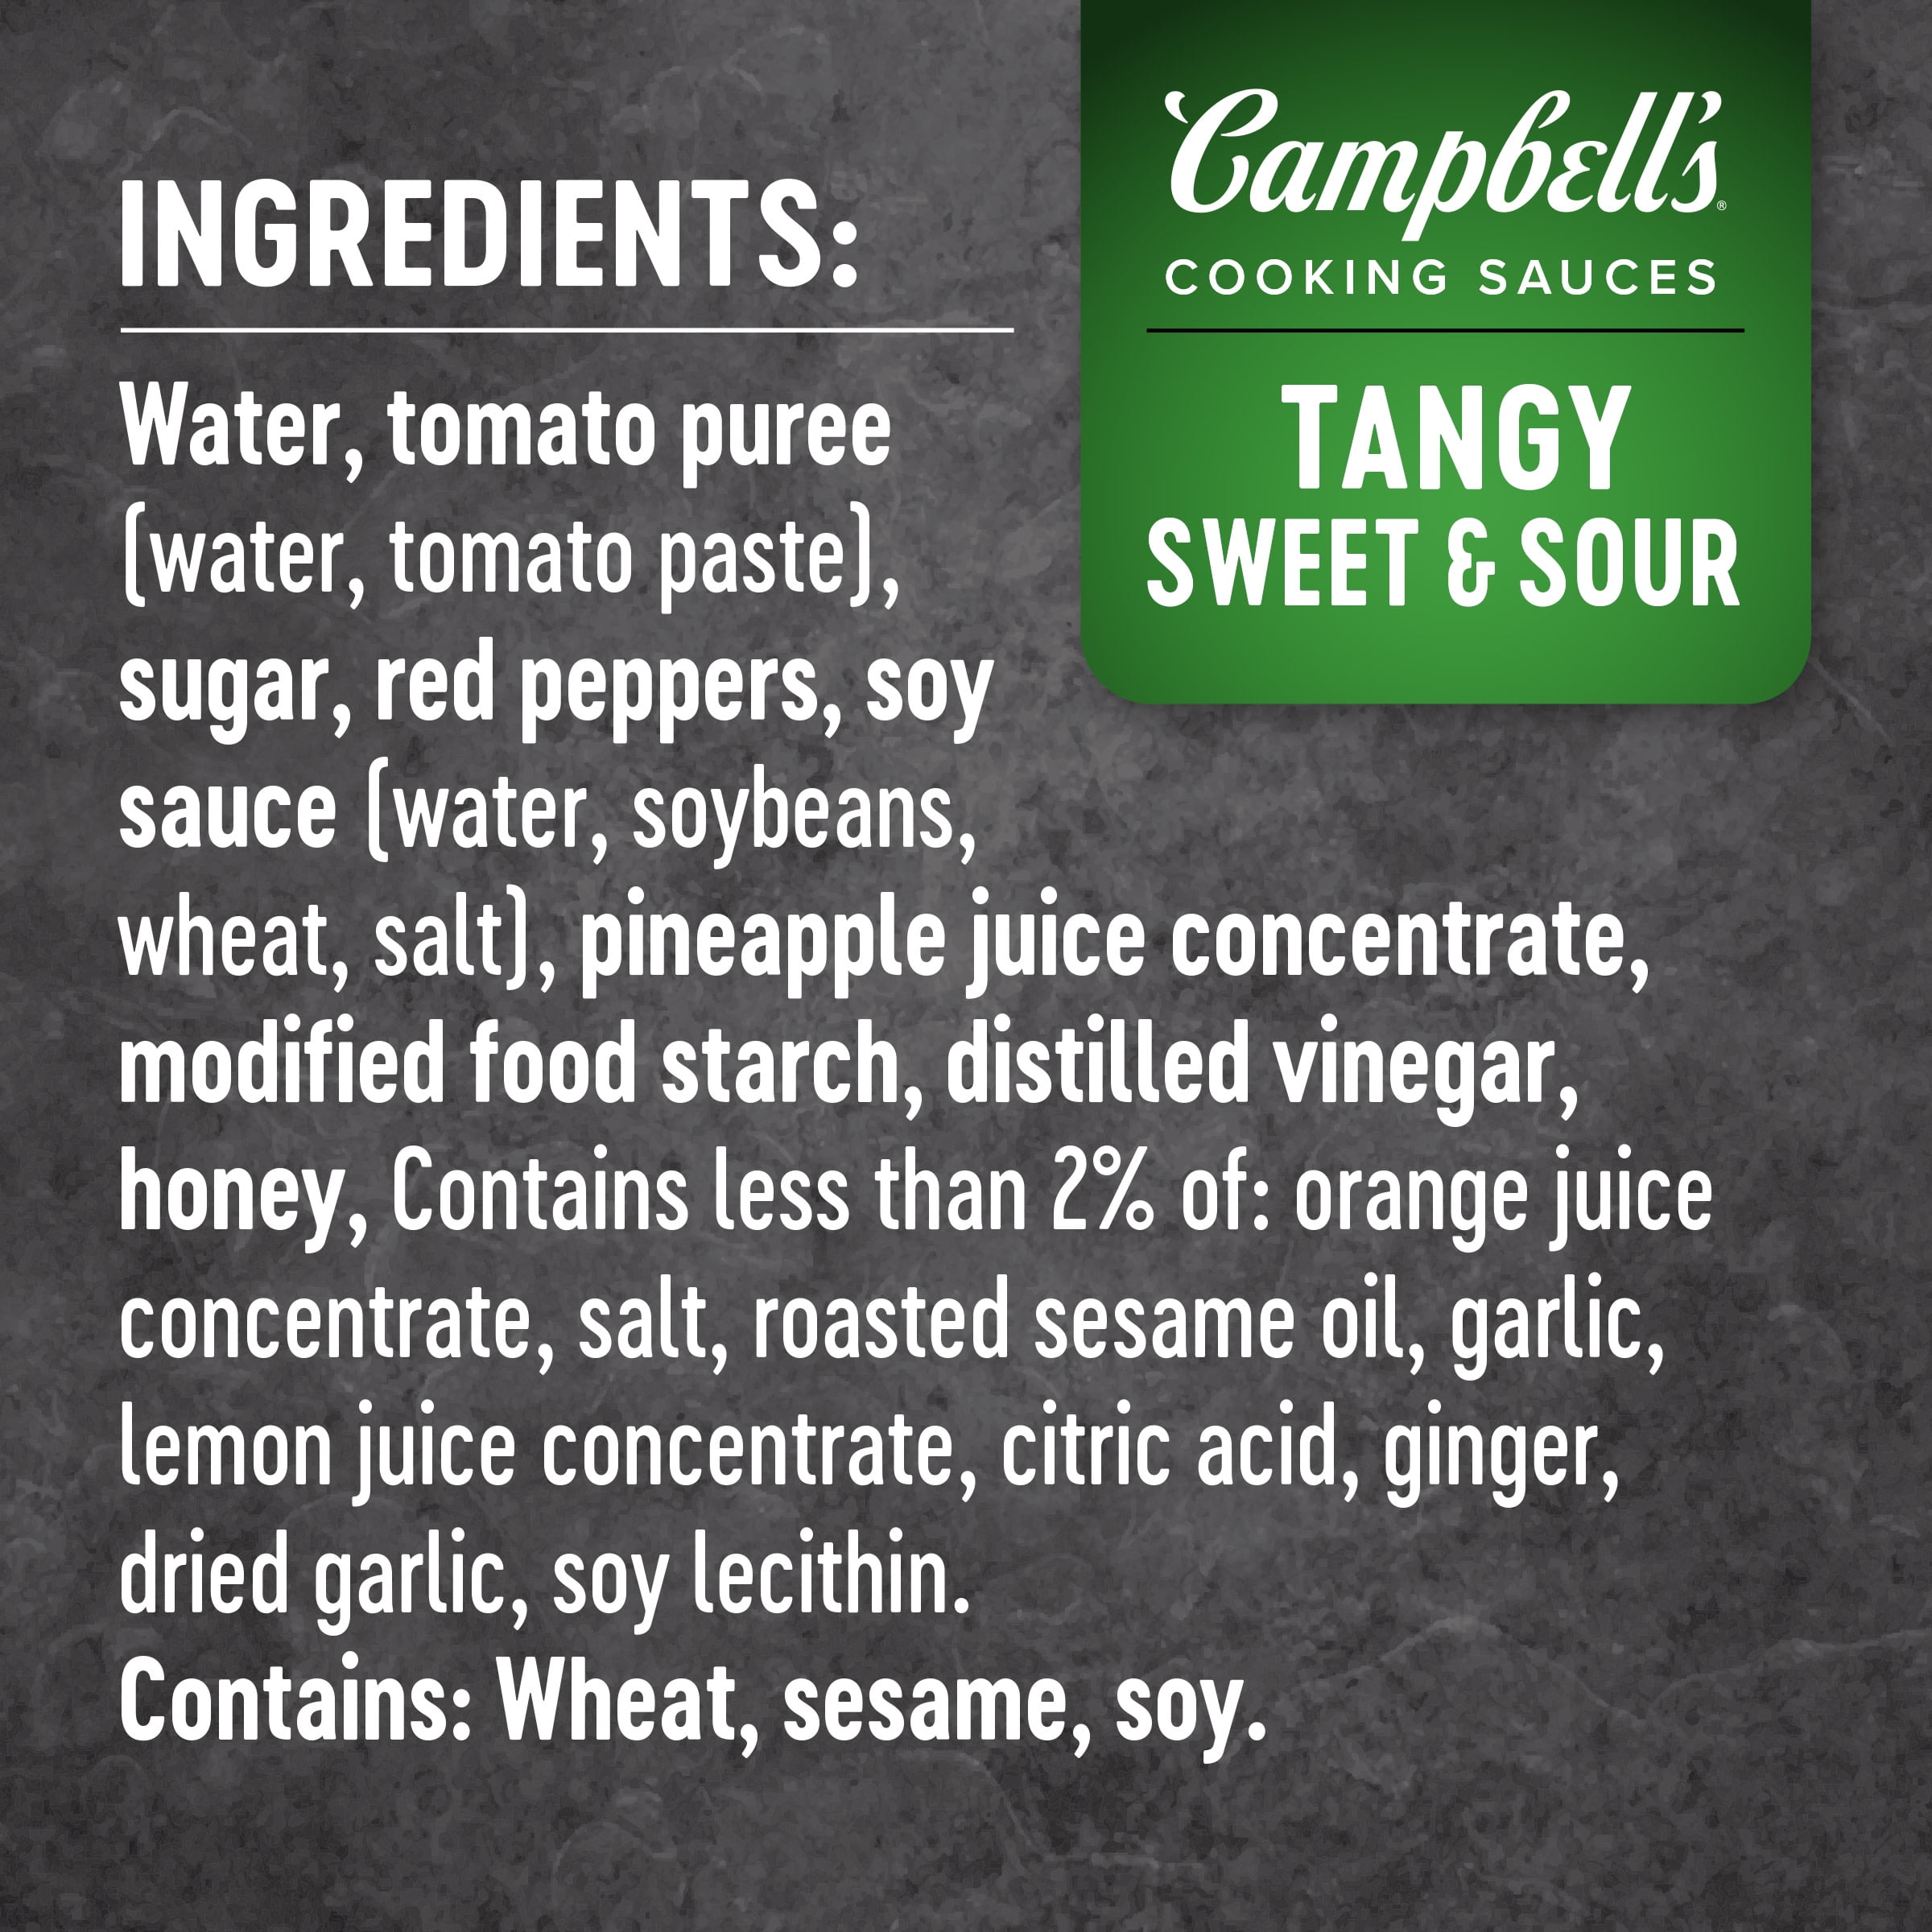 Campbell's® Cooking Sauces